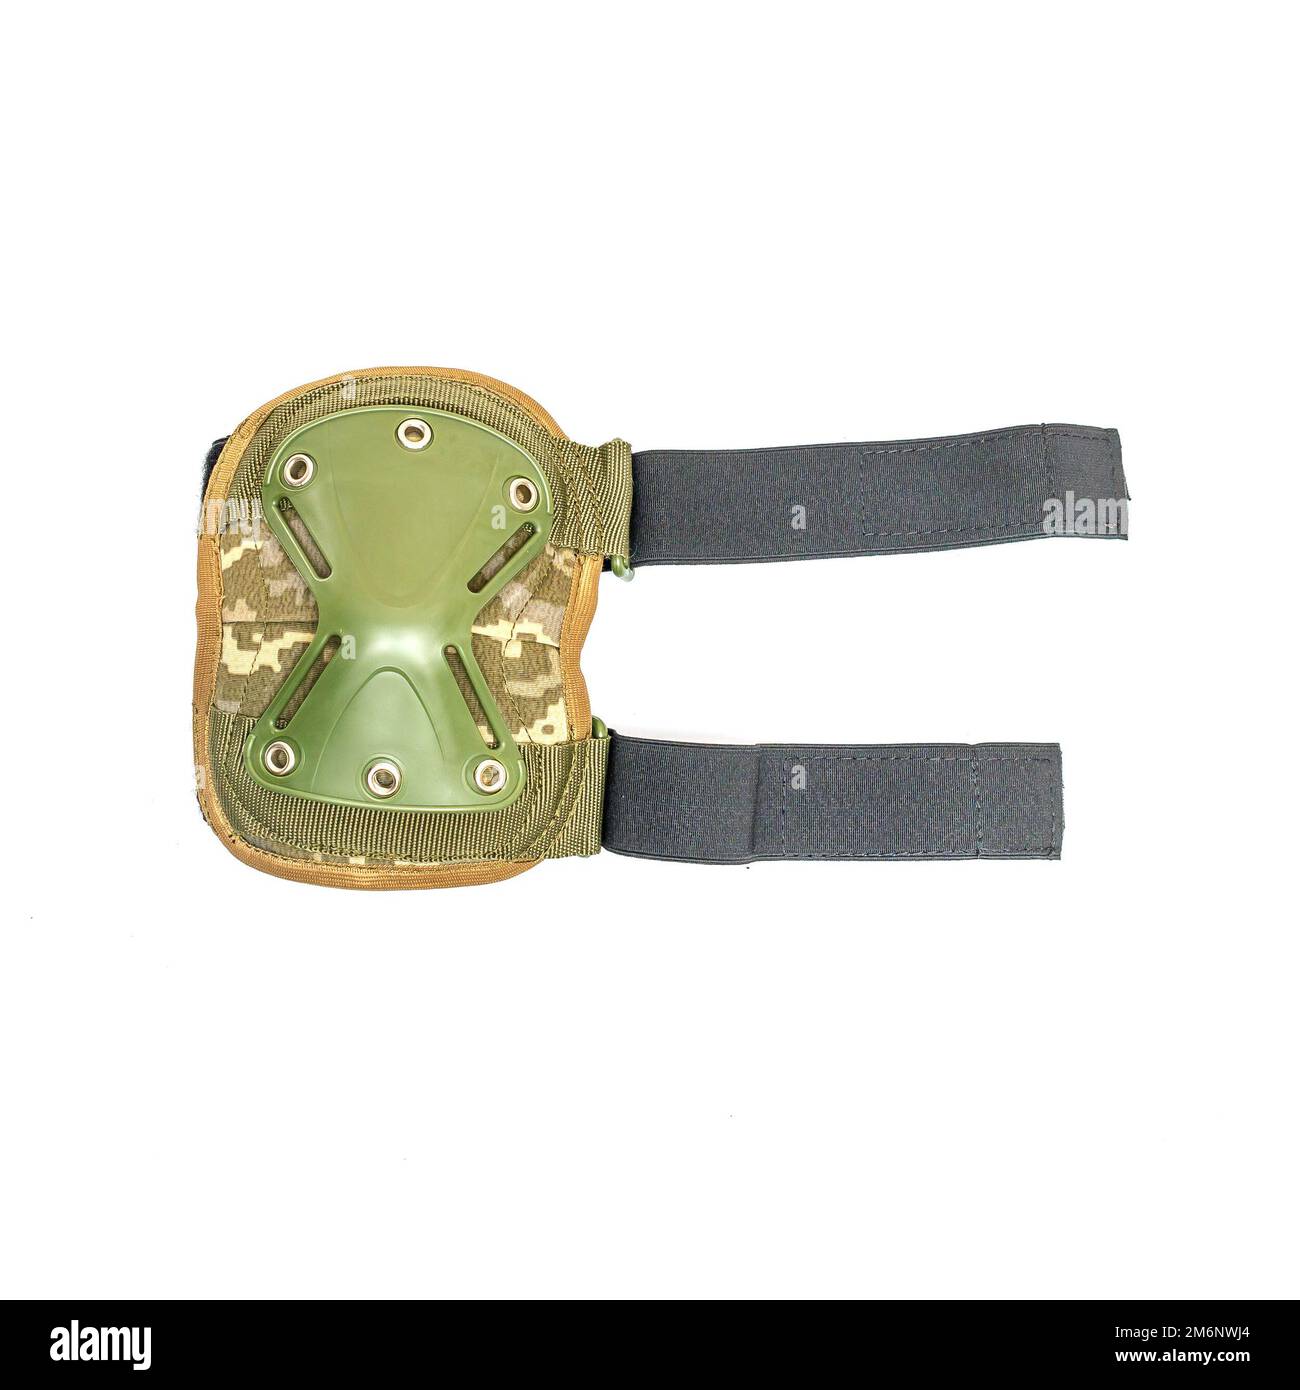 Plastic knee pad for military on white background Stock Photo - Alamy